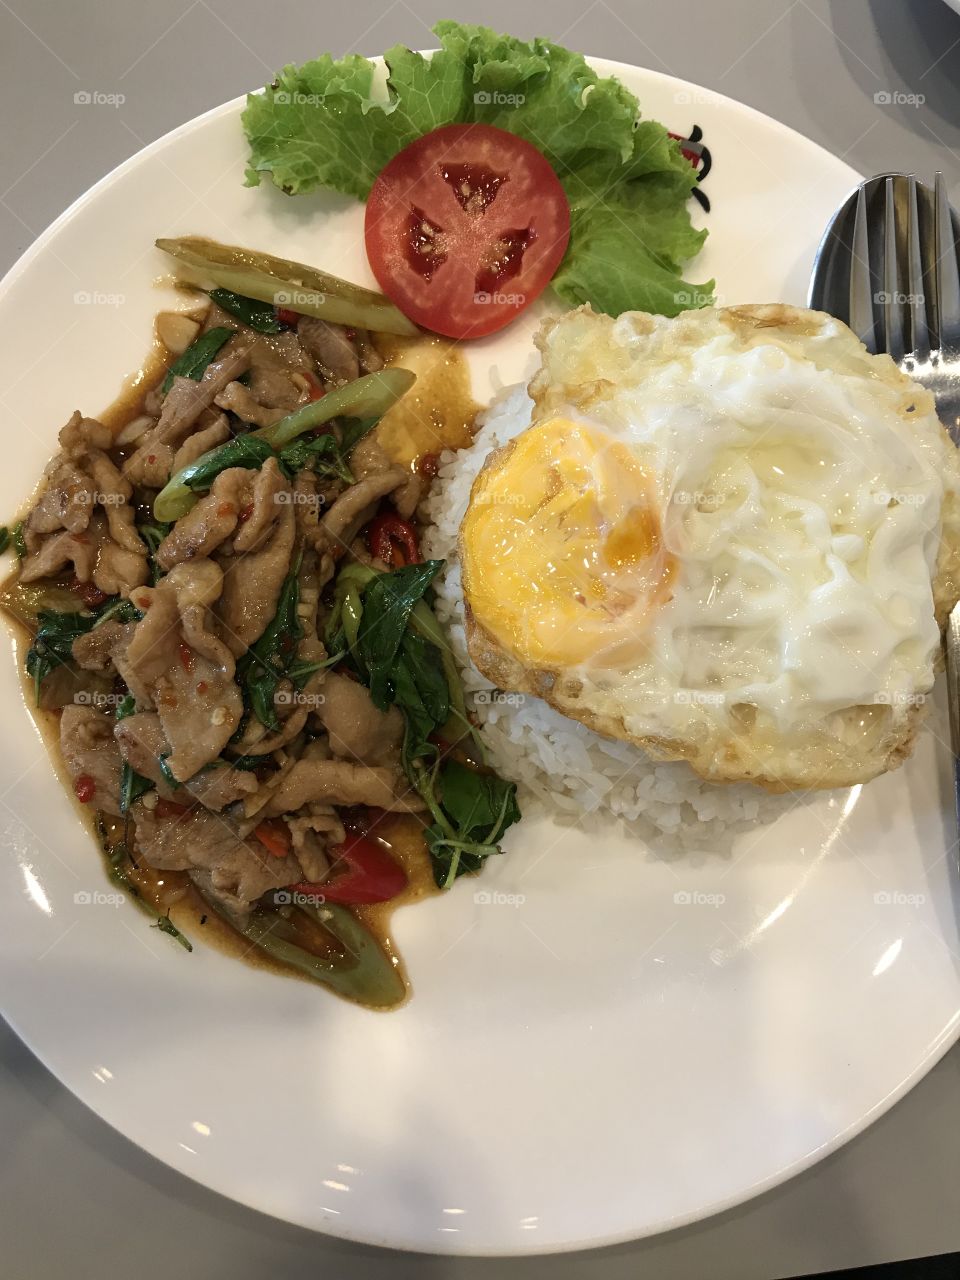 Signature Thai food “Stir-fried pork and basil with Steamed rice”